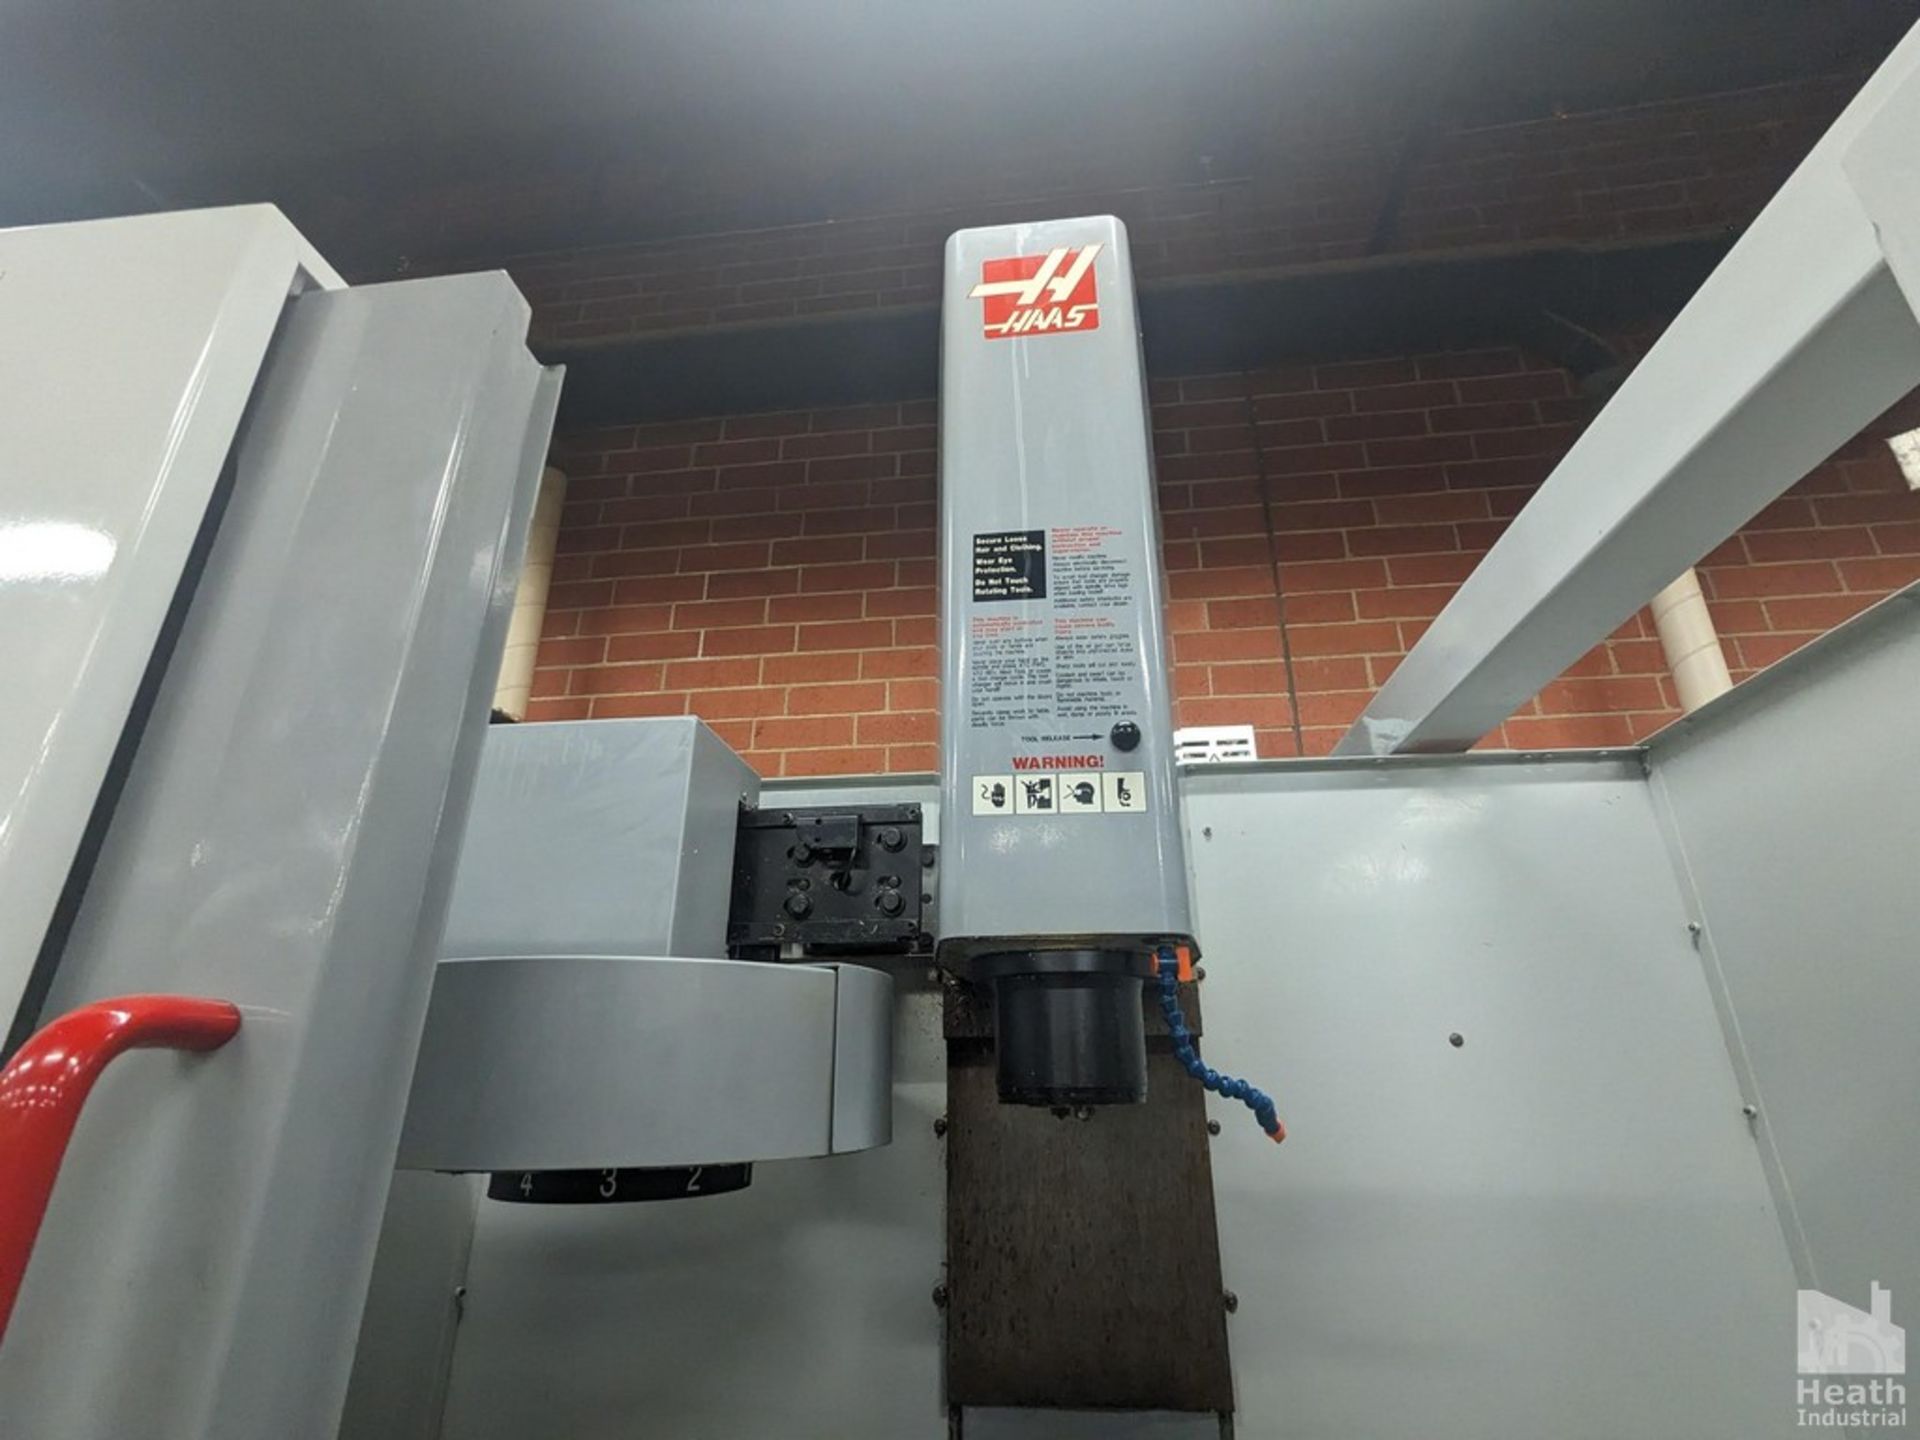 HAAS 3-AXIS MODEL MINI MILL CNC VERTICAL MACHINING CENTER, S/N 42775(NEW 2005) 12"X29" TABLE, 16" - Image 2 of 8